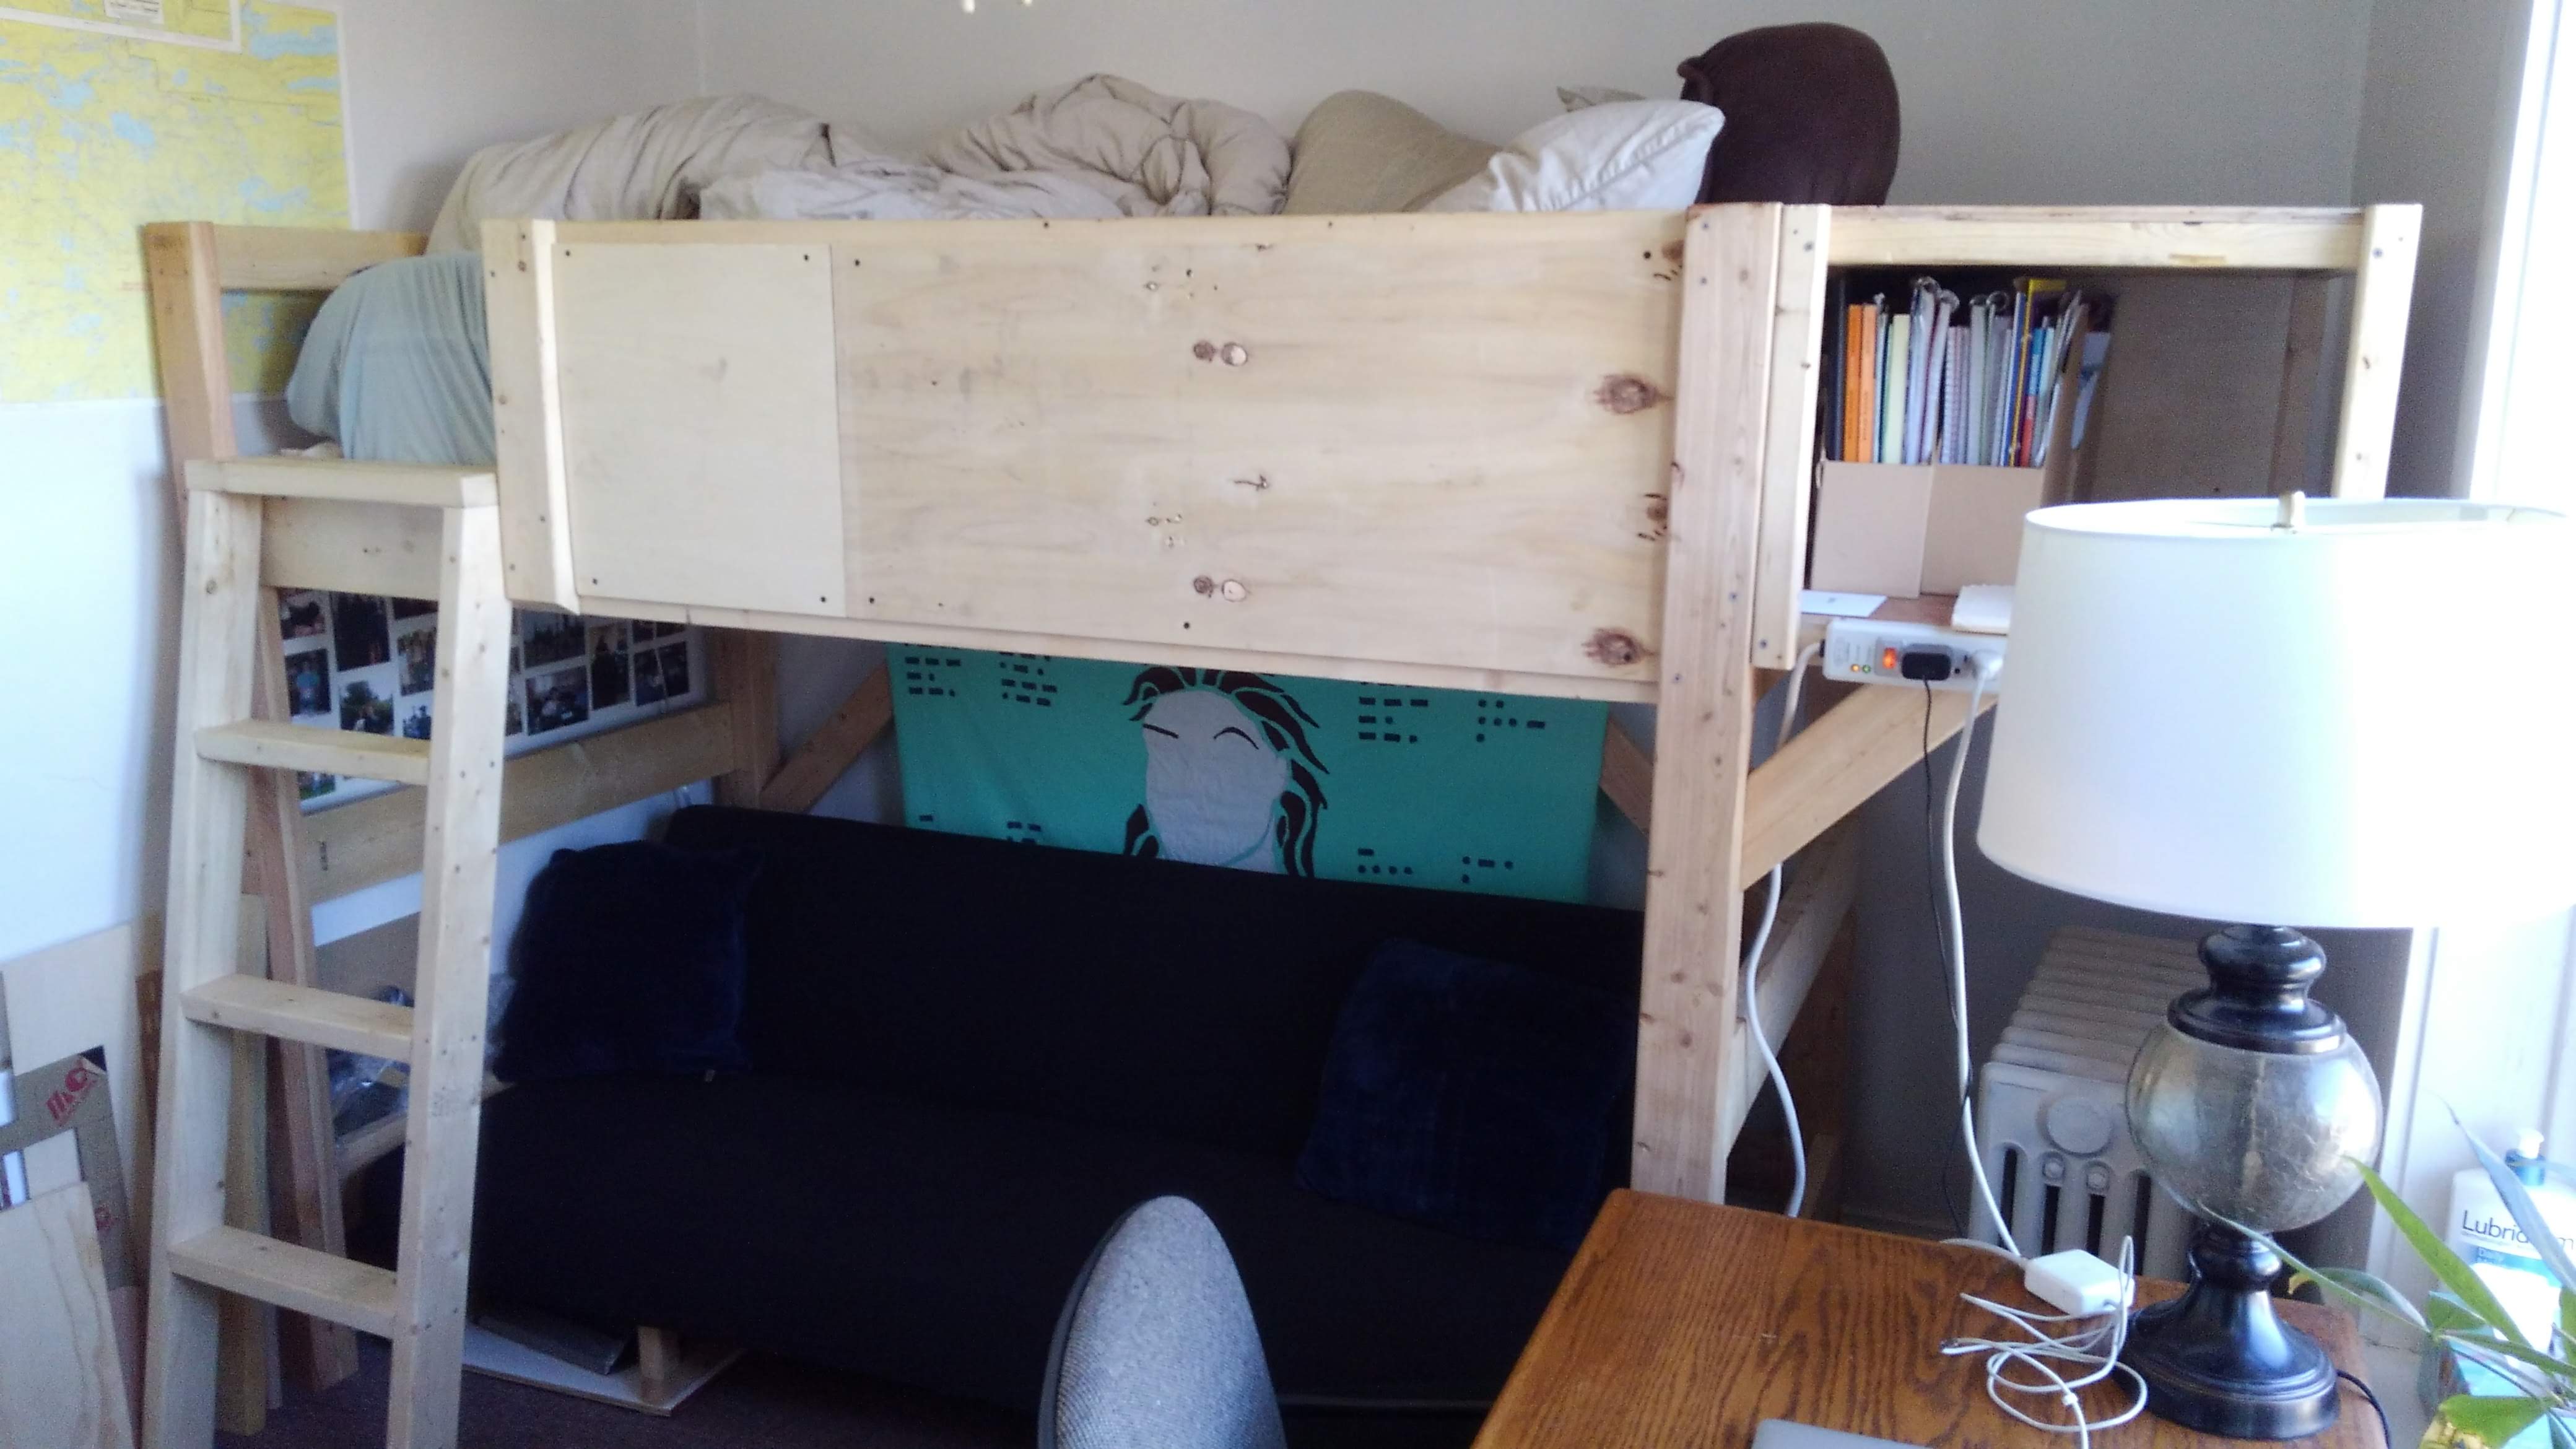 a lofted bed with a ladder over a futon